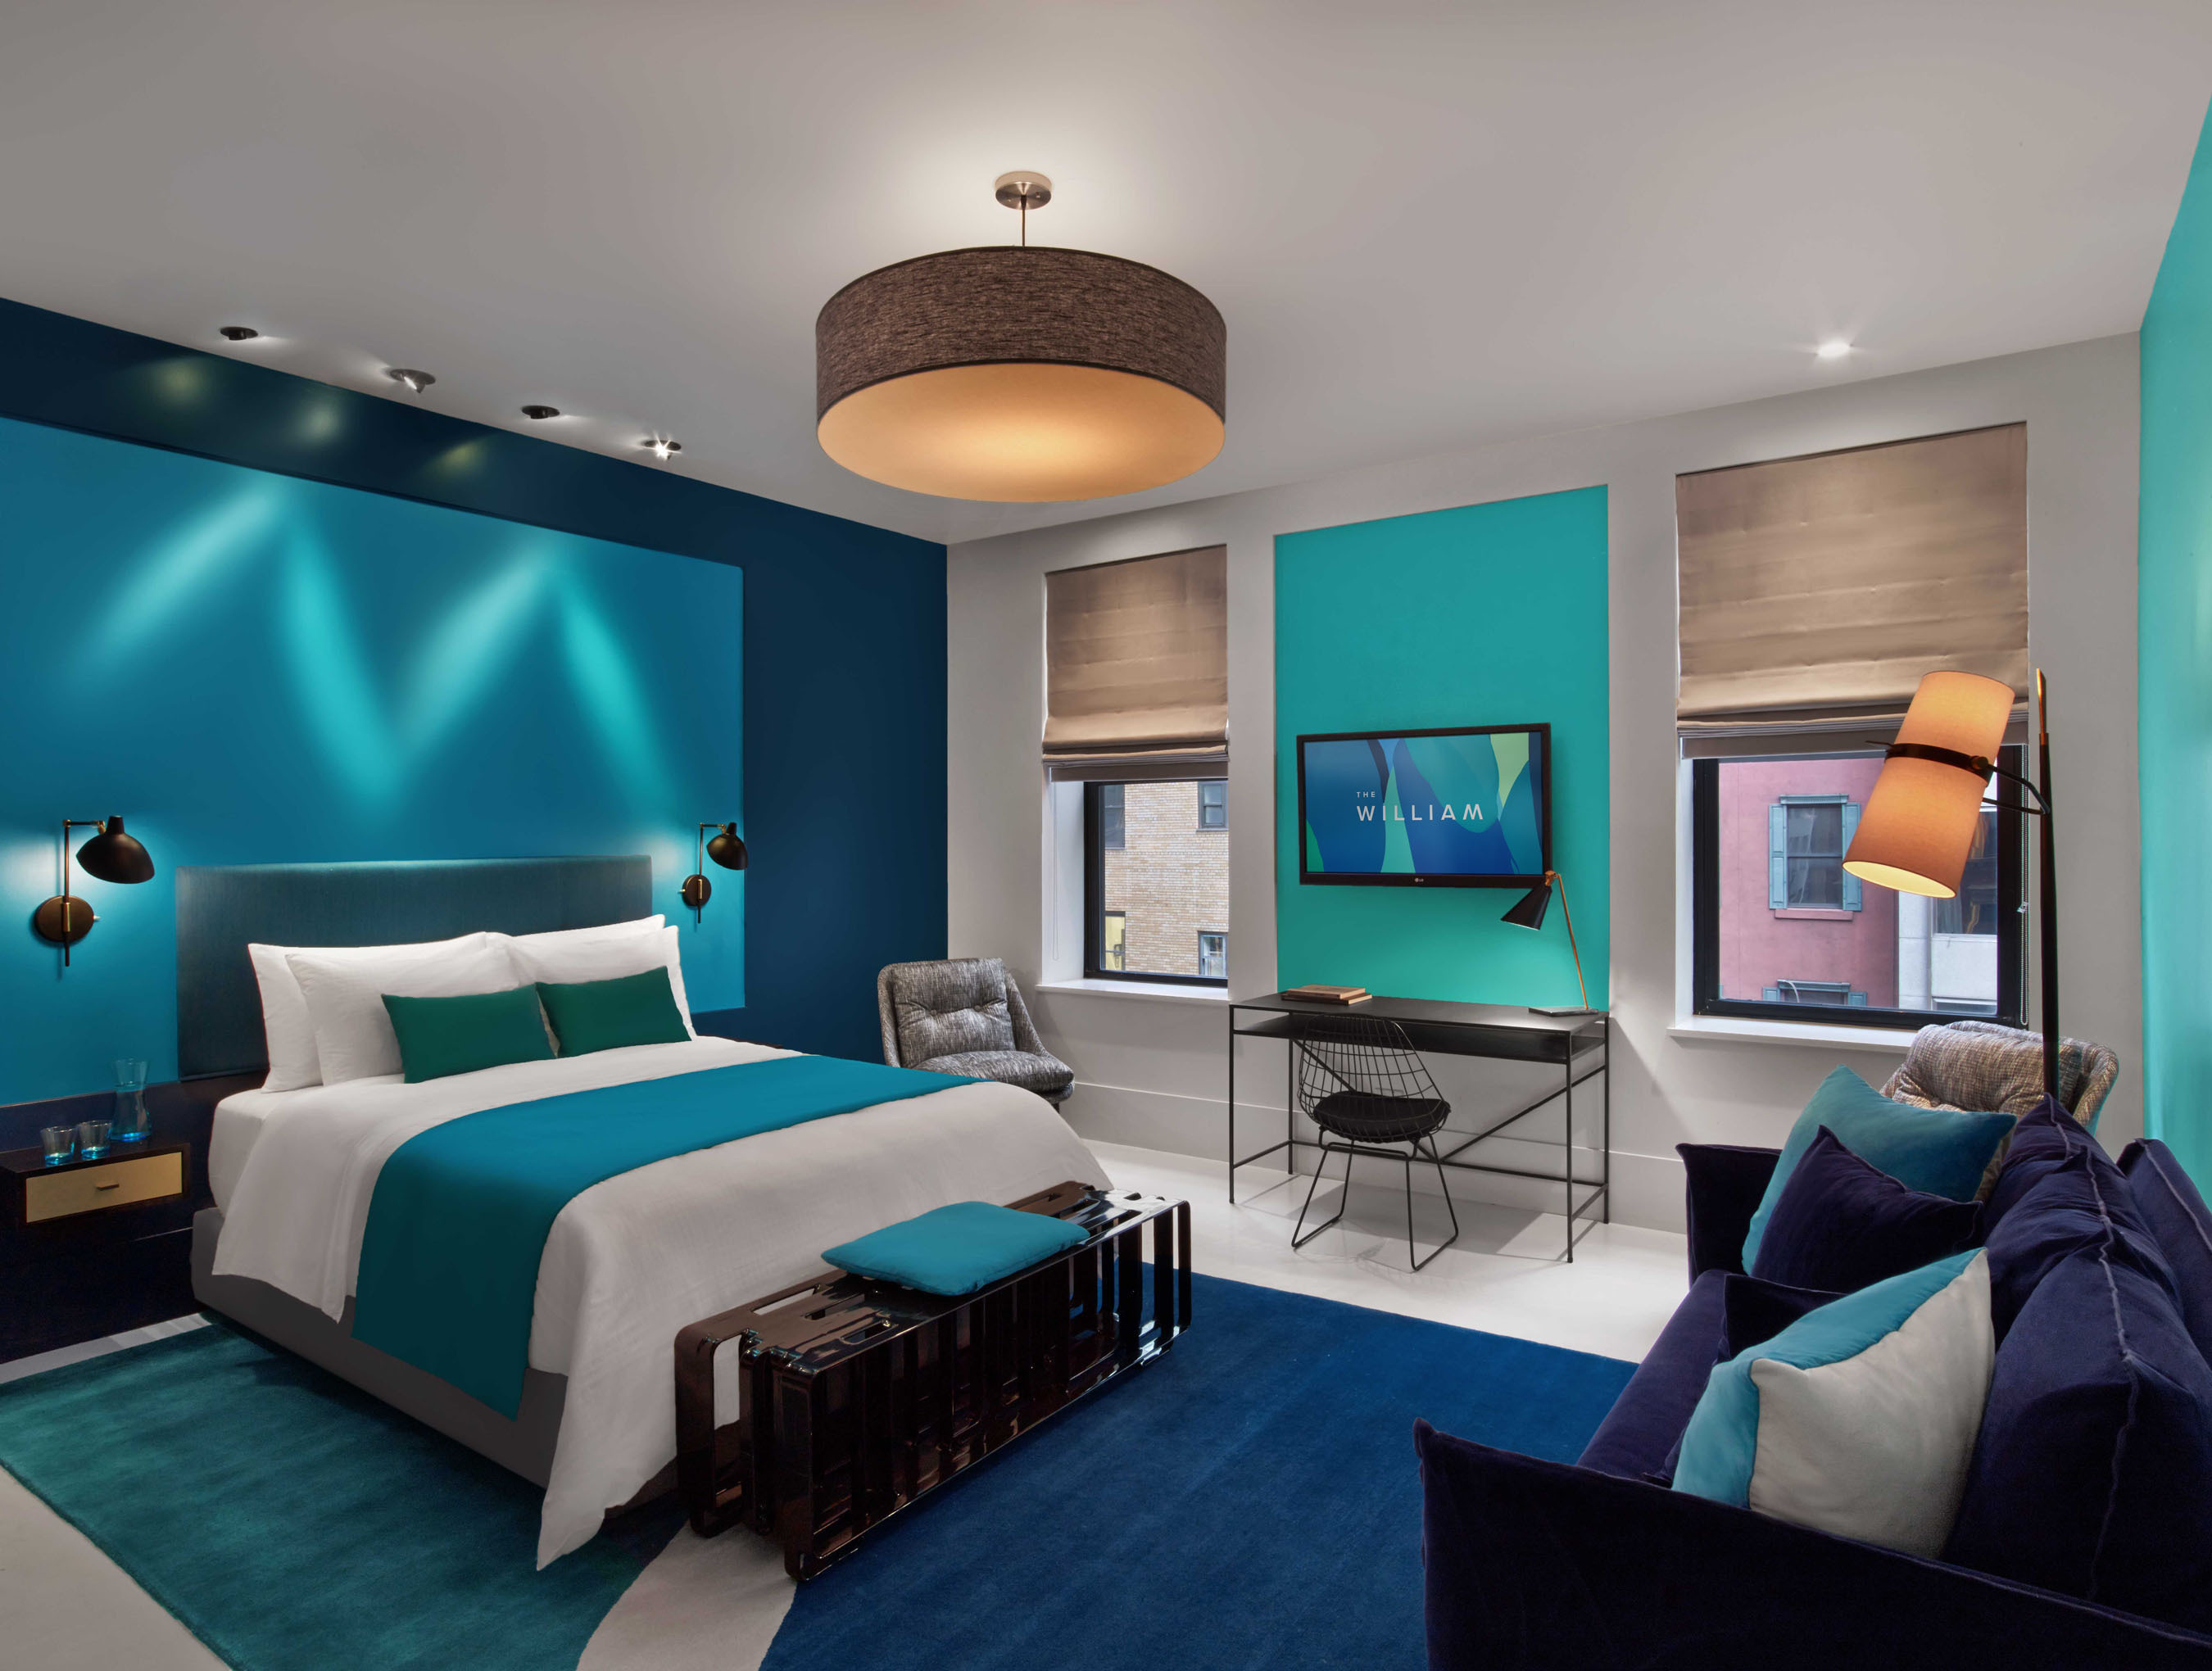 The William Unveils Guest Suite Designs in Anticipation of January 2014 Opening in New York City. (PRNewsFoto/The William, Eric Laignel) (PRNewsFoto/THE WILLIAM)